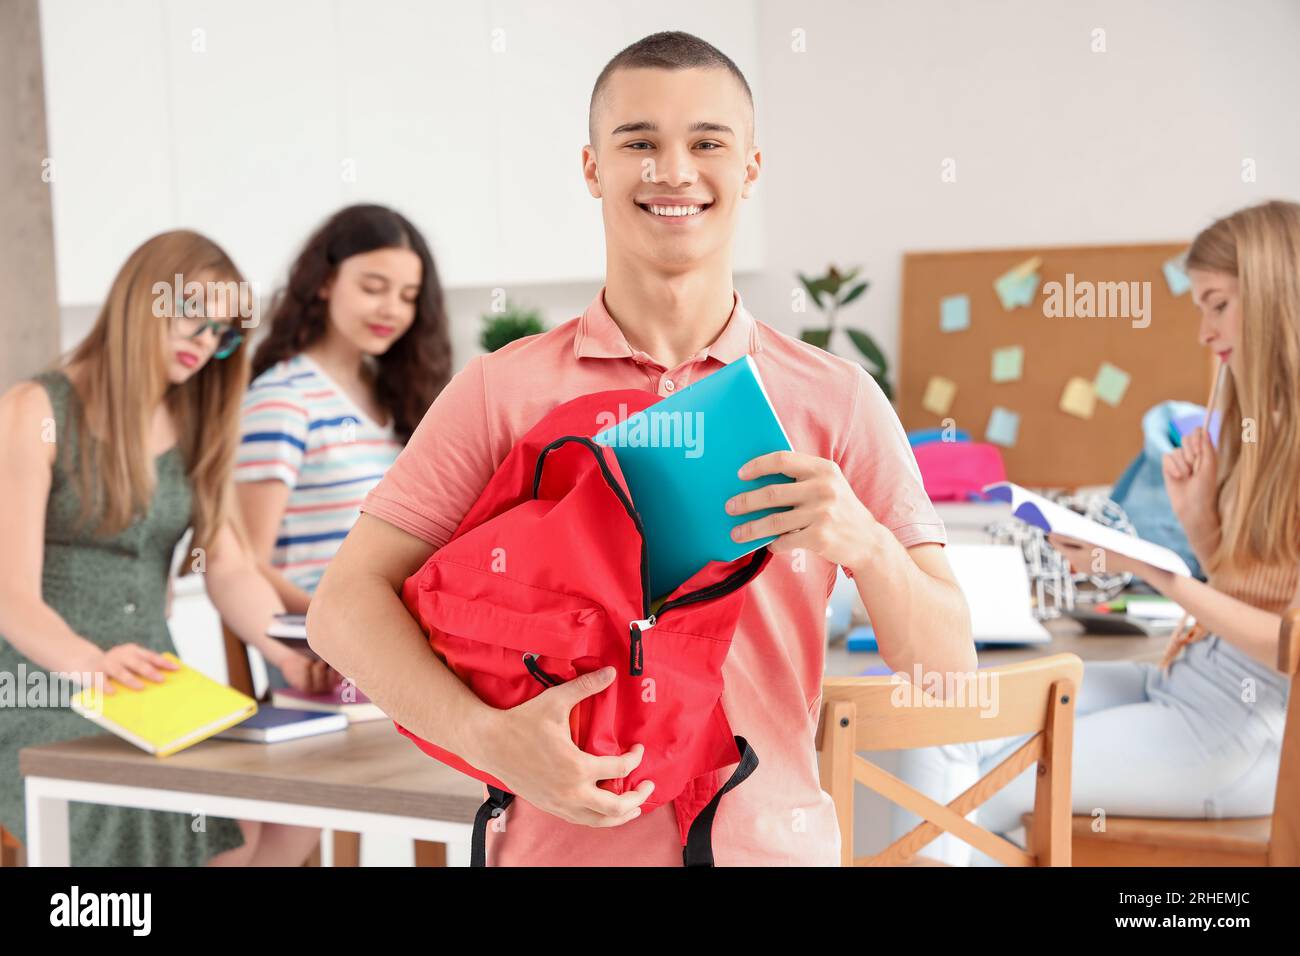 Male student taking copybook out of backpack in kitchen Stock Photo